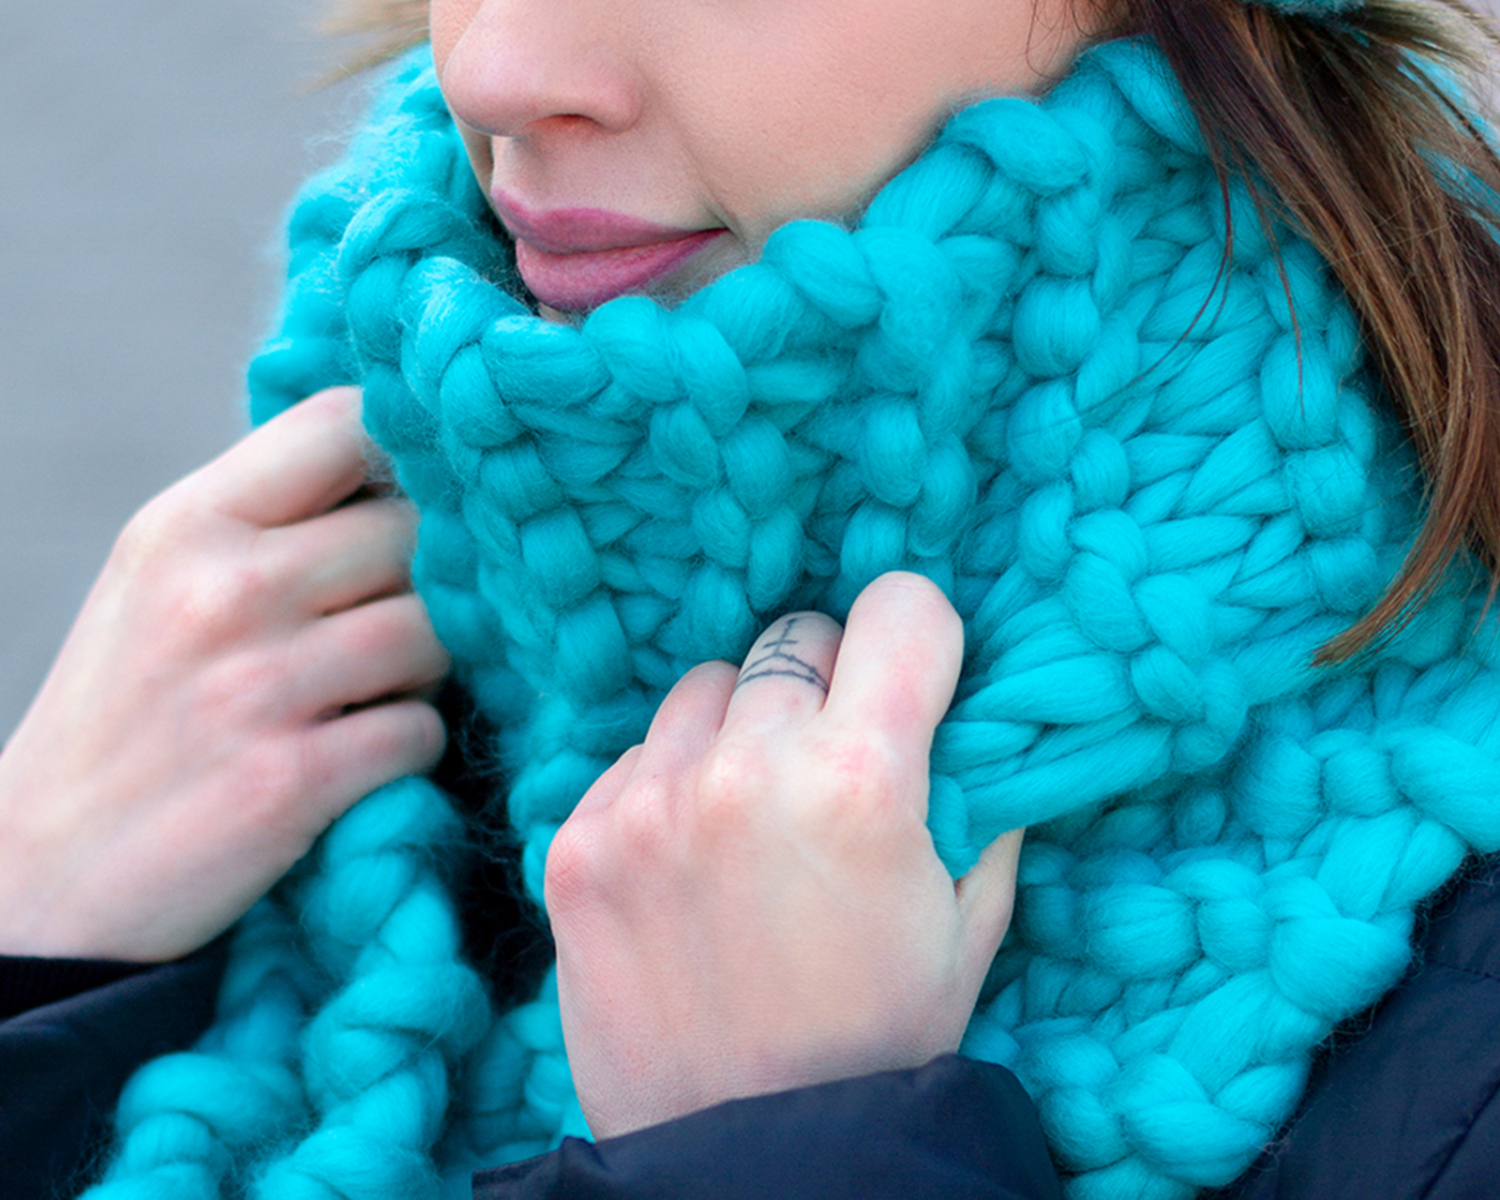 Neon Aqua Giant Knitted Extra Long, Oversized Scarf